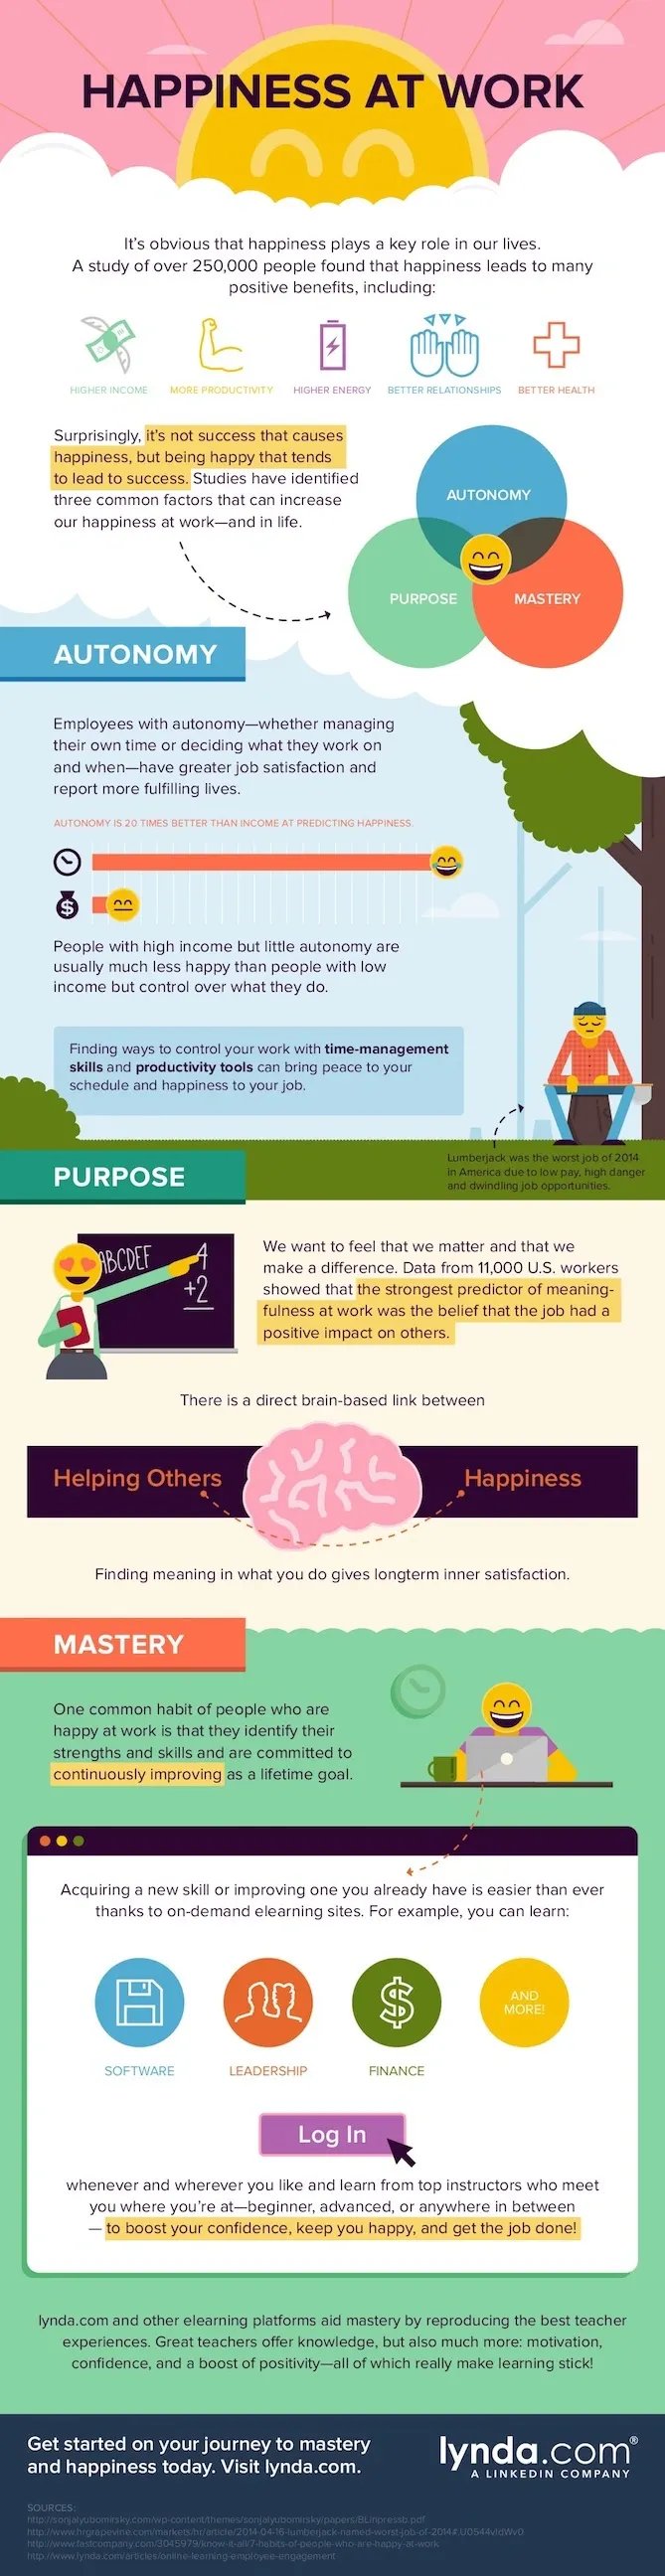 happiness-at-work infographic